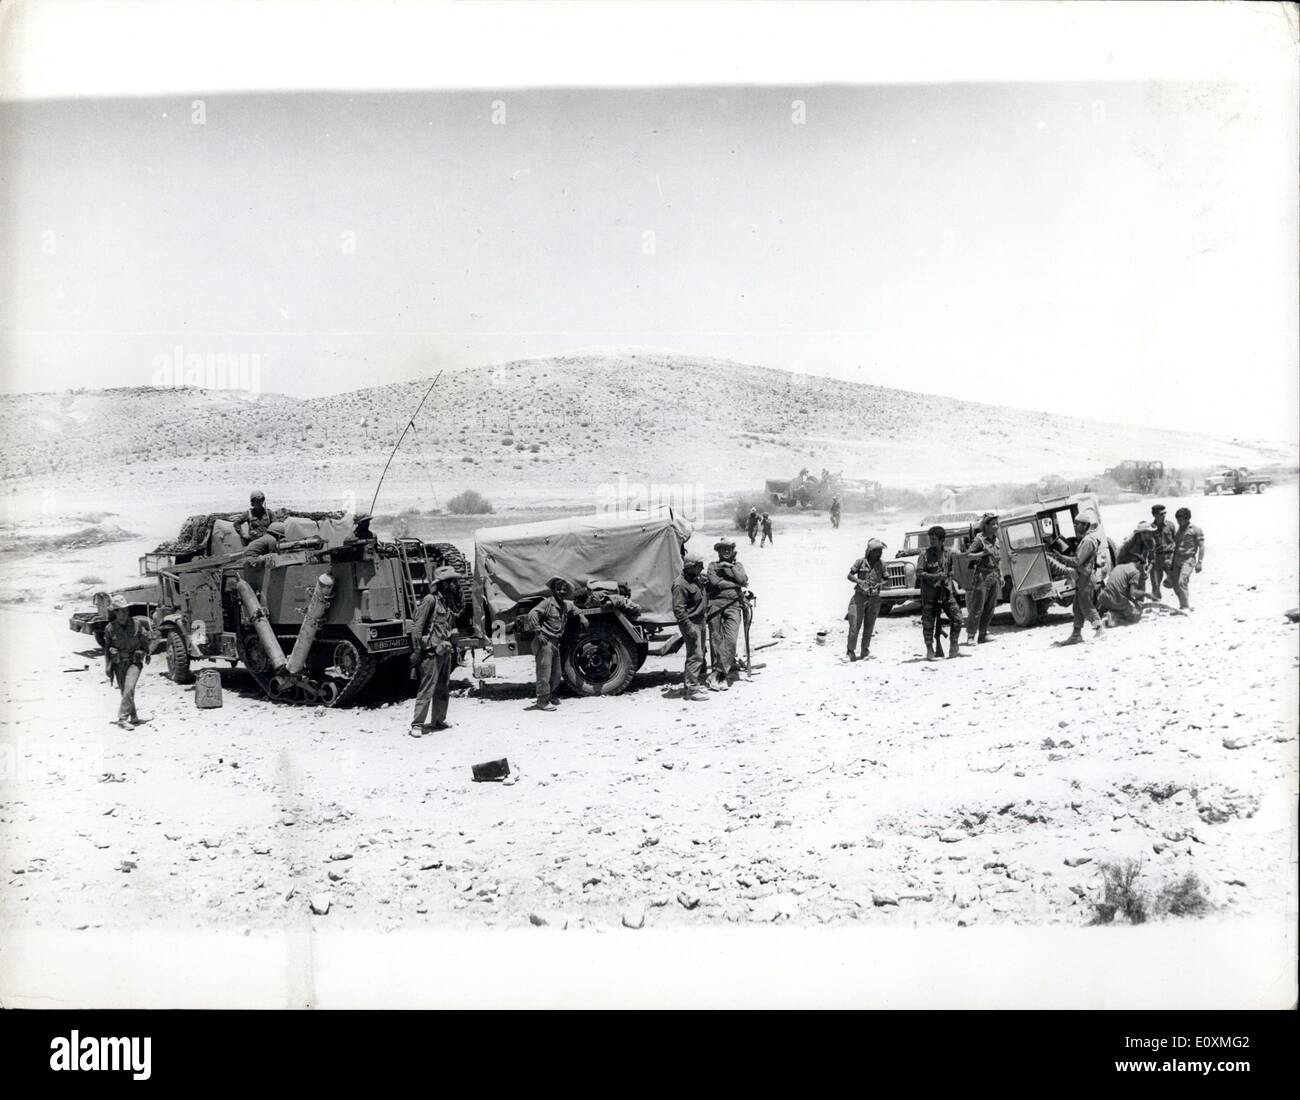 May 31, 1967 - The Tension In The Middle East Scenes In The Negev Desert. Photo shows Israeli soldiers take it easy as they stand beside their army trucks in an encampment in the Negev Desert. Stock Photo